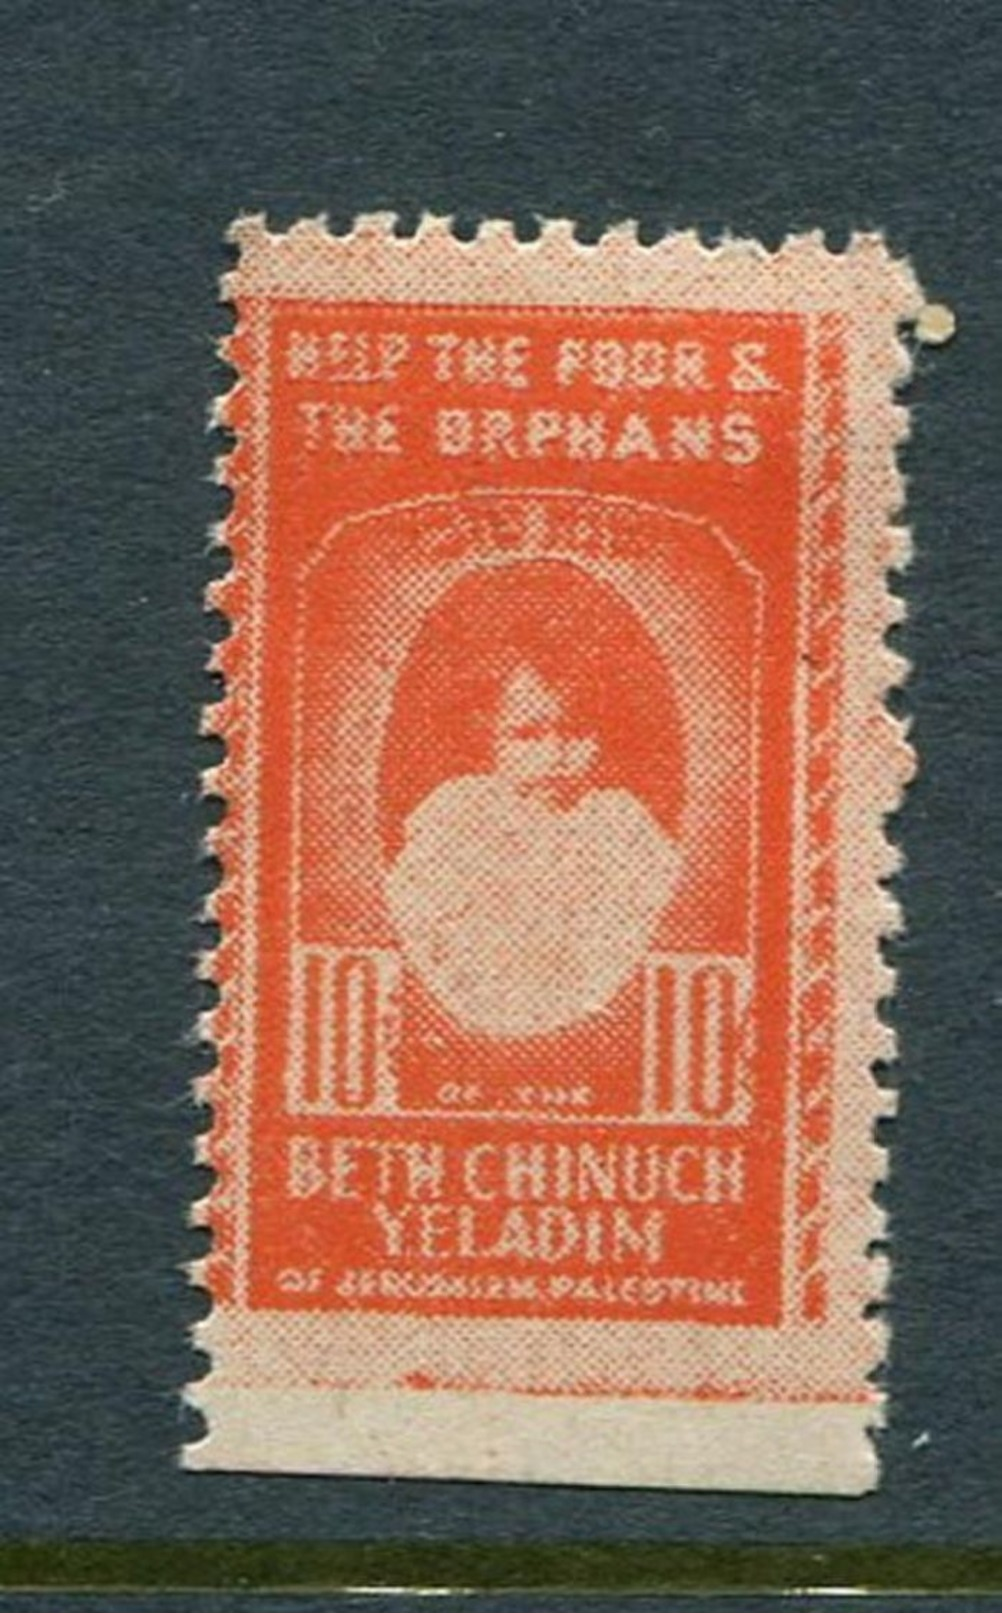 Help The Poor And The Orphans Beth Chinuch Yeladim Seal/ Reklamemarke Poster Stamp Vignette Hinged 3/4 X 1 1/4" - Erinofilia